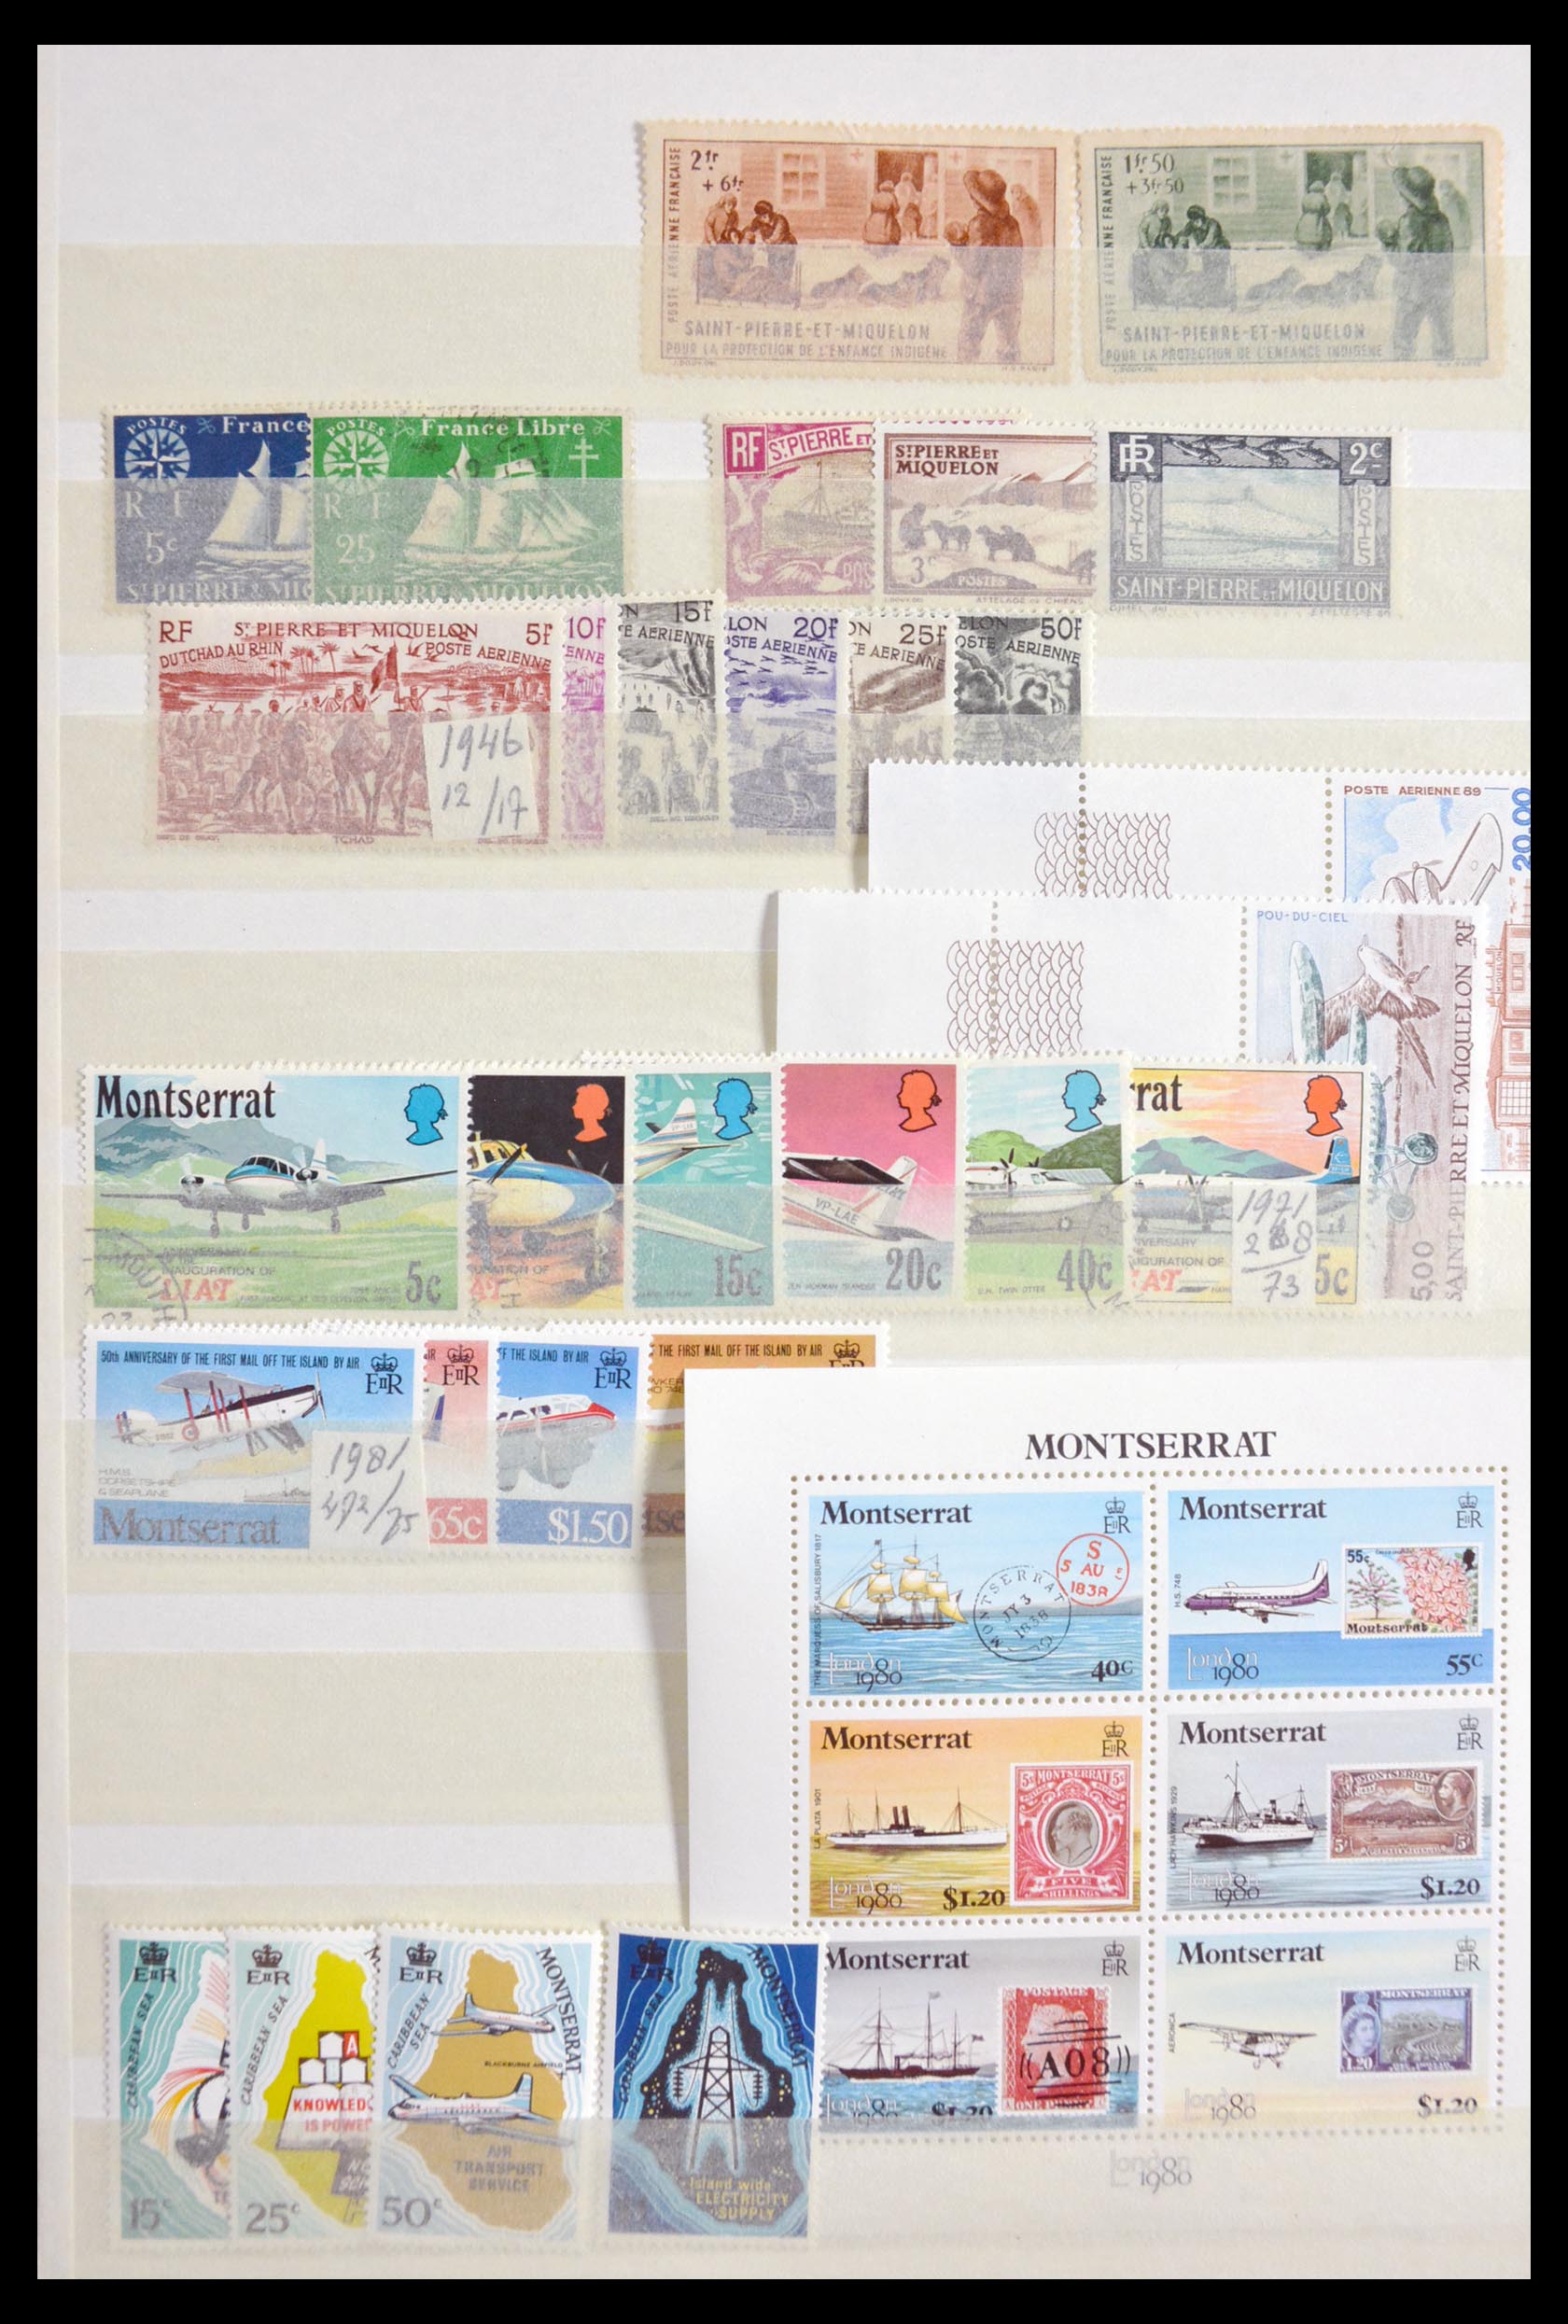 29917 066 - 29917 Latin America airmail stamps.